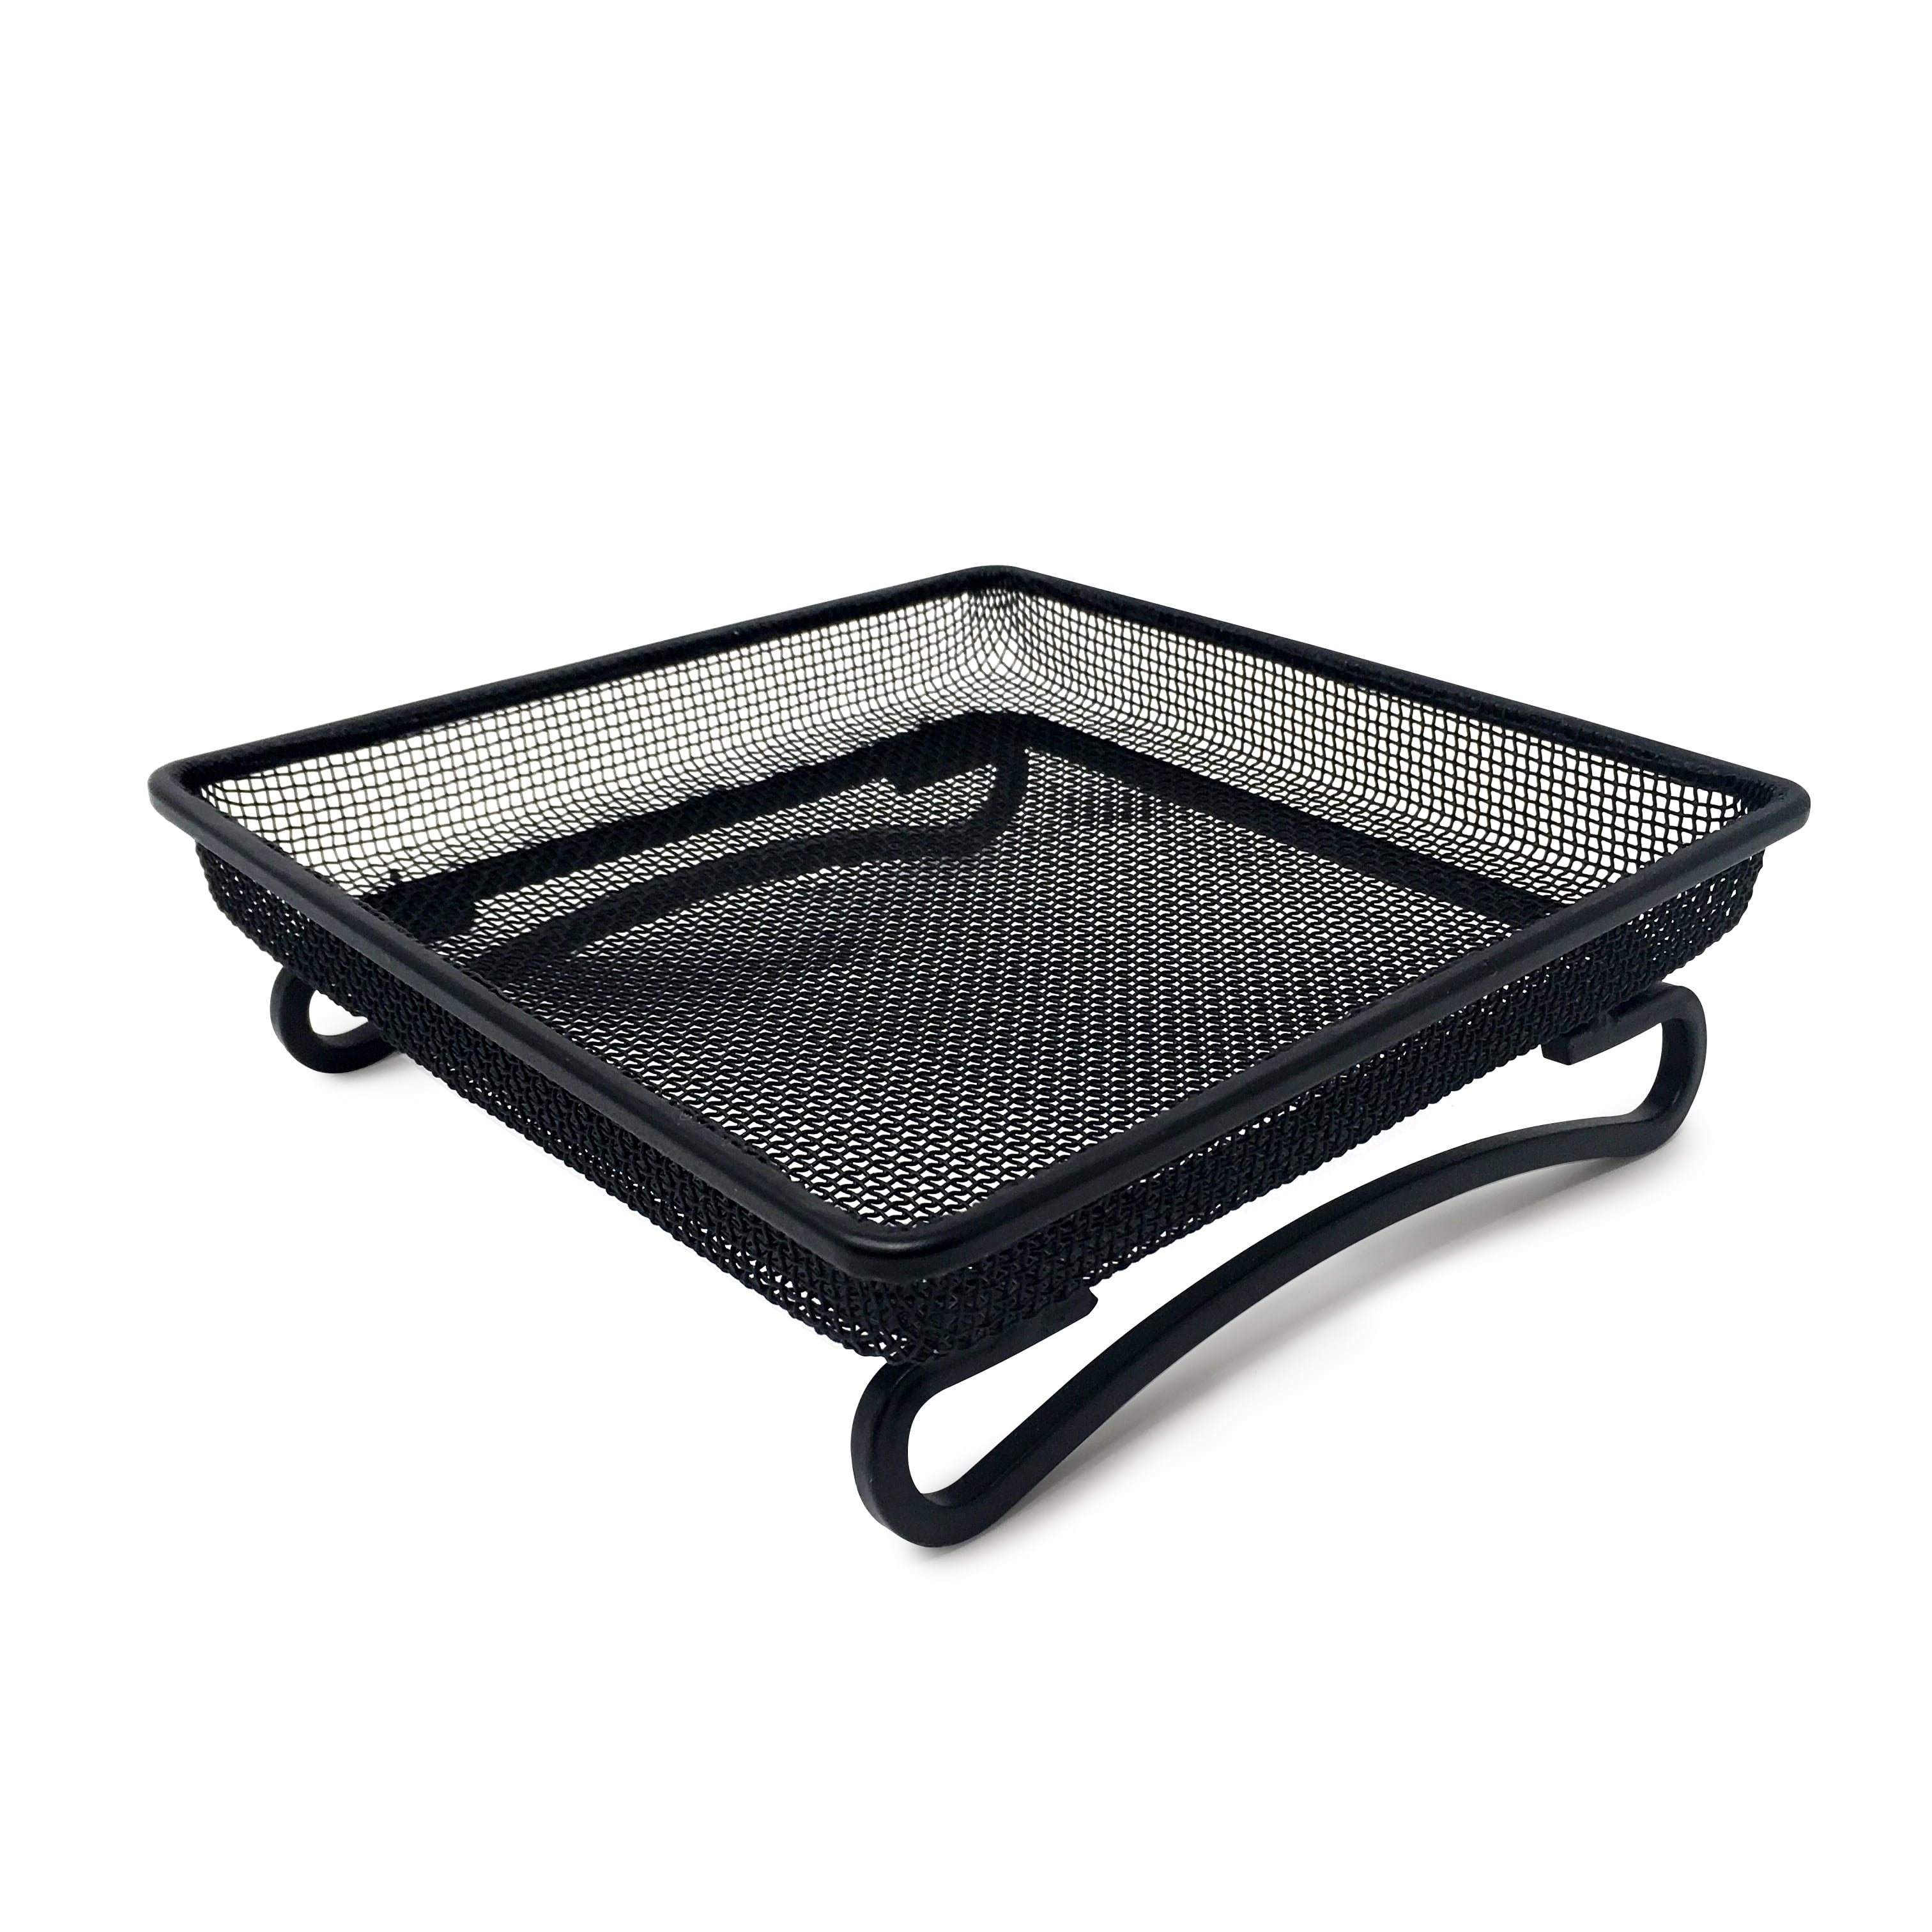 Ground Bird Feeder Tray for Feeding Birds That Feed Off The Ground Durable and Large Platform Bird Feeder Dish Size 10.75 x 10.75 x 2.5 inches